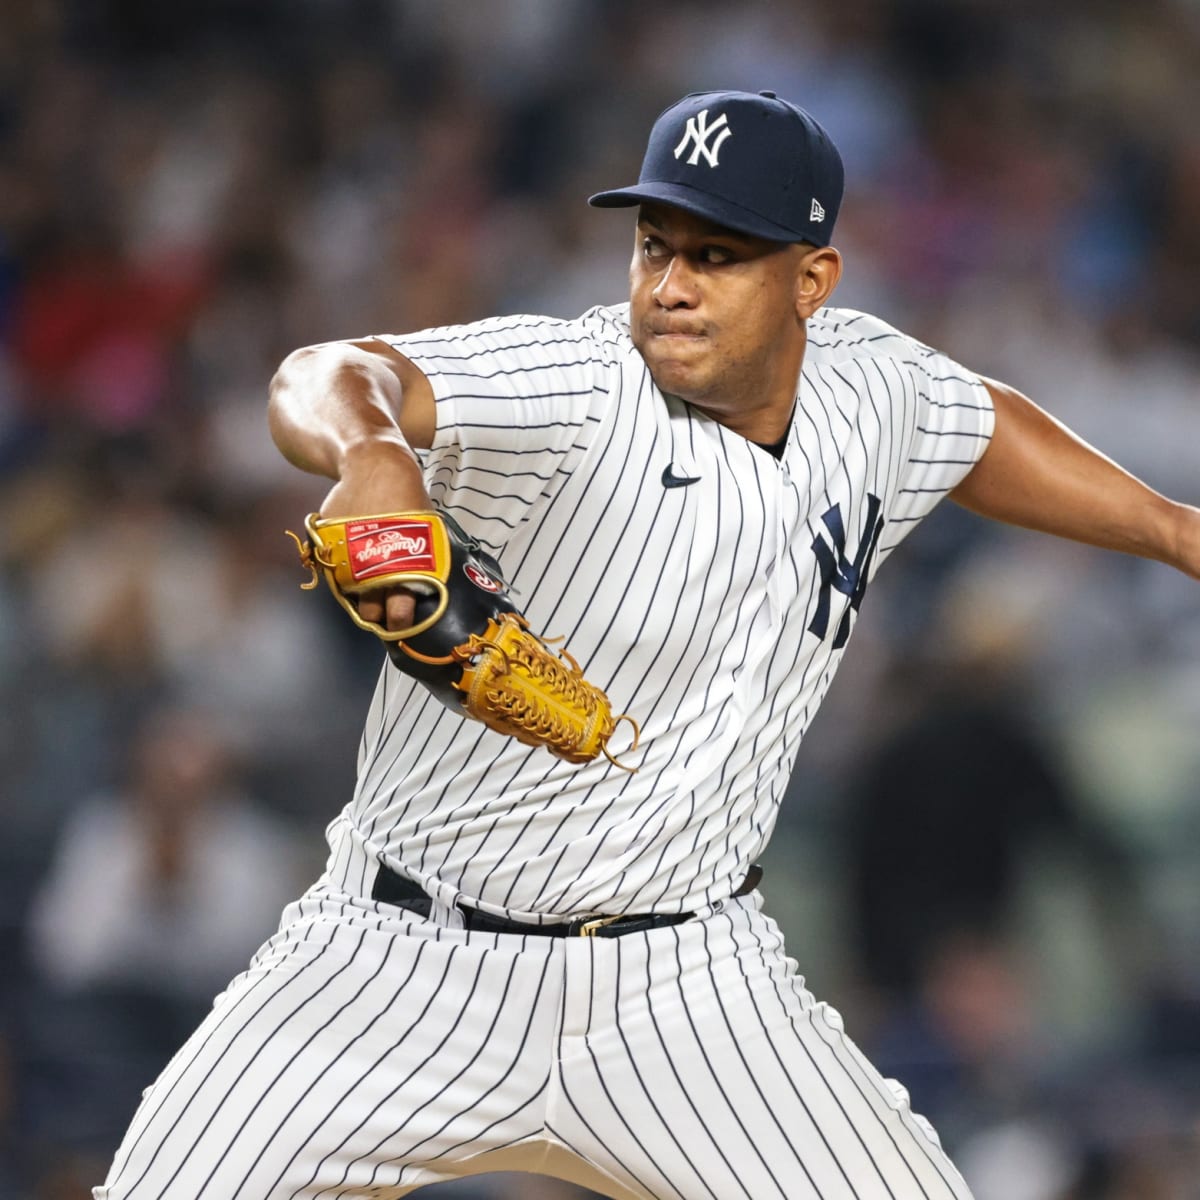 Yankees promote Double-A pitching prospect, Wandy Peralta to IL